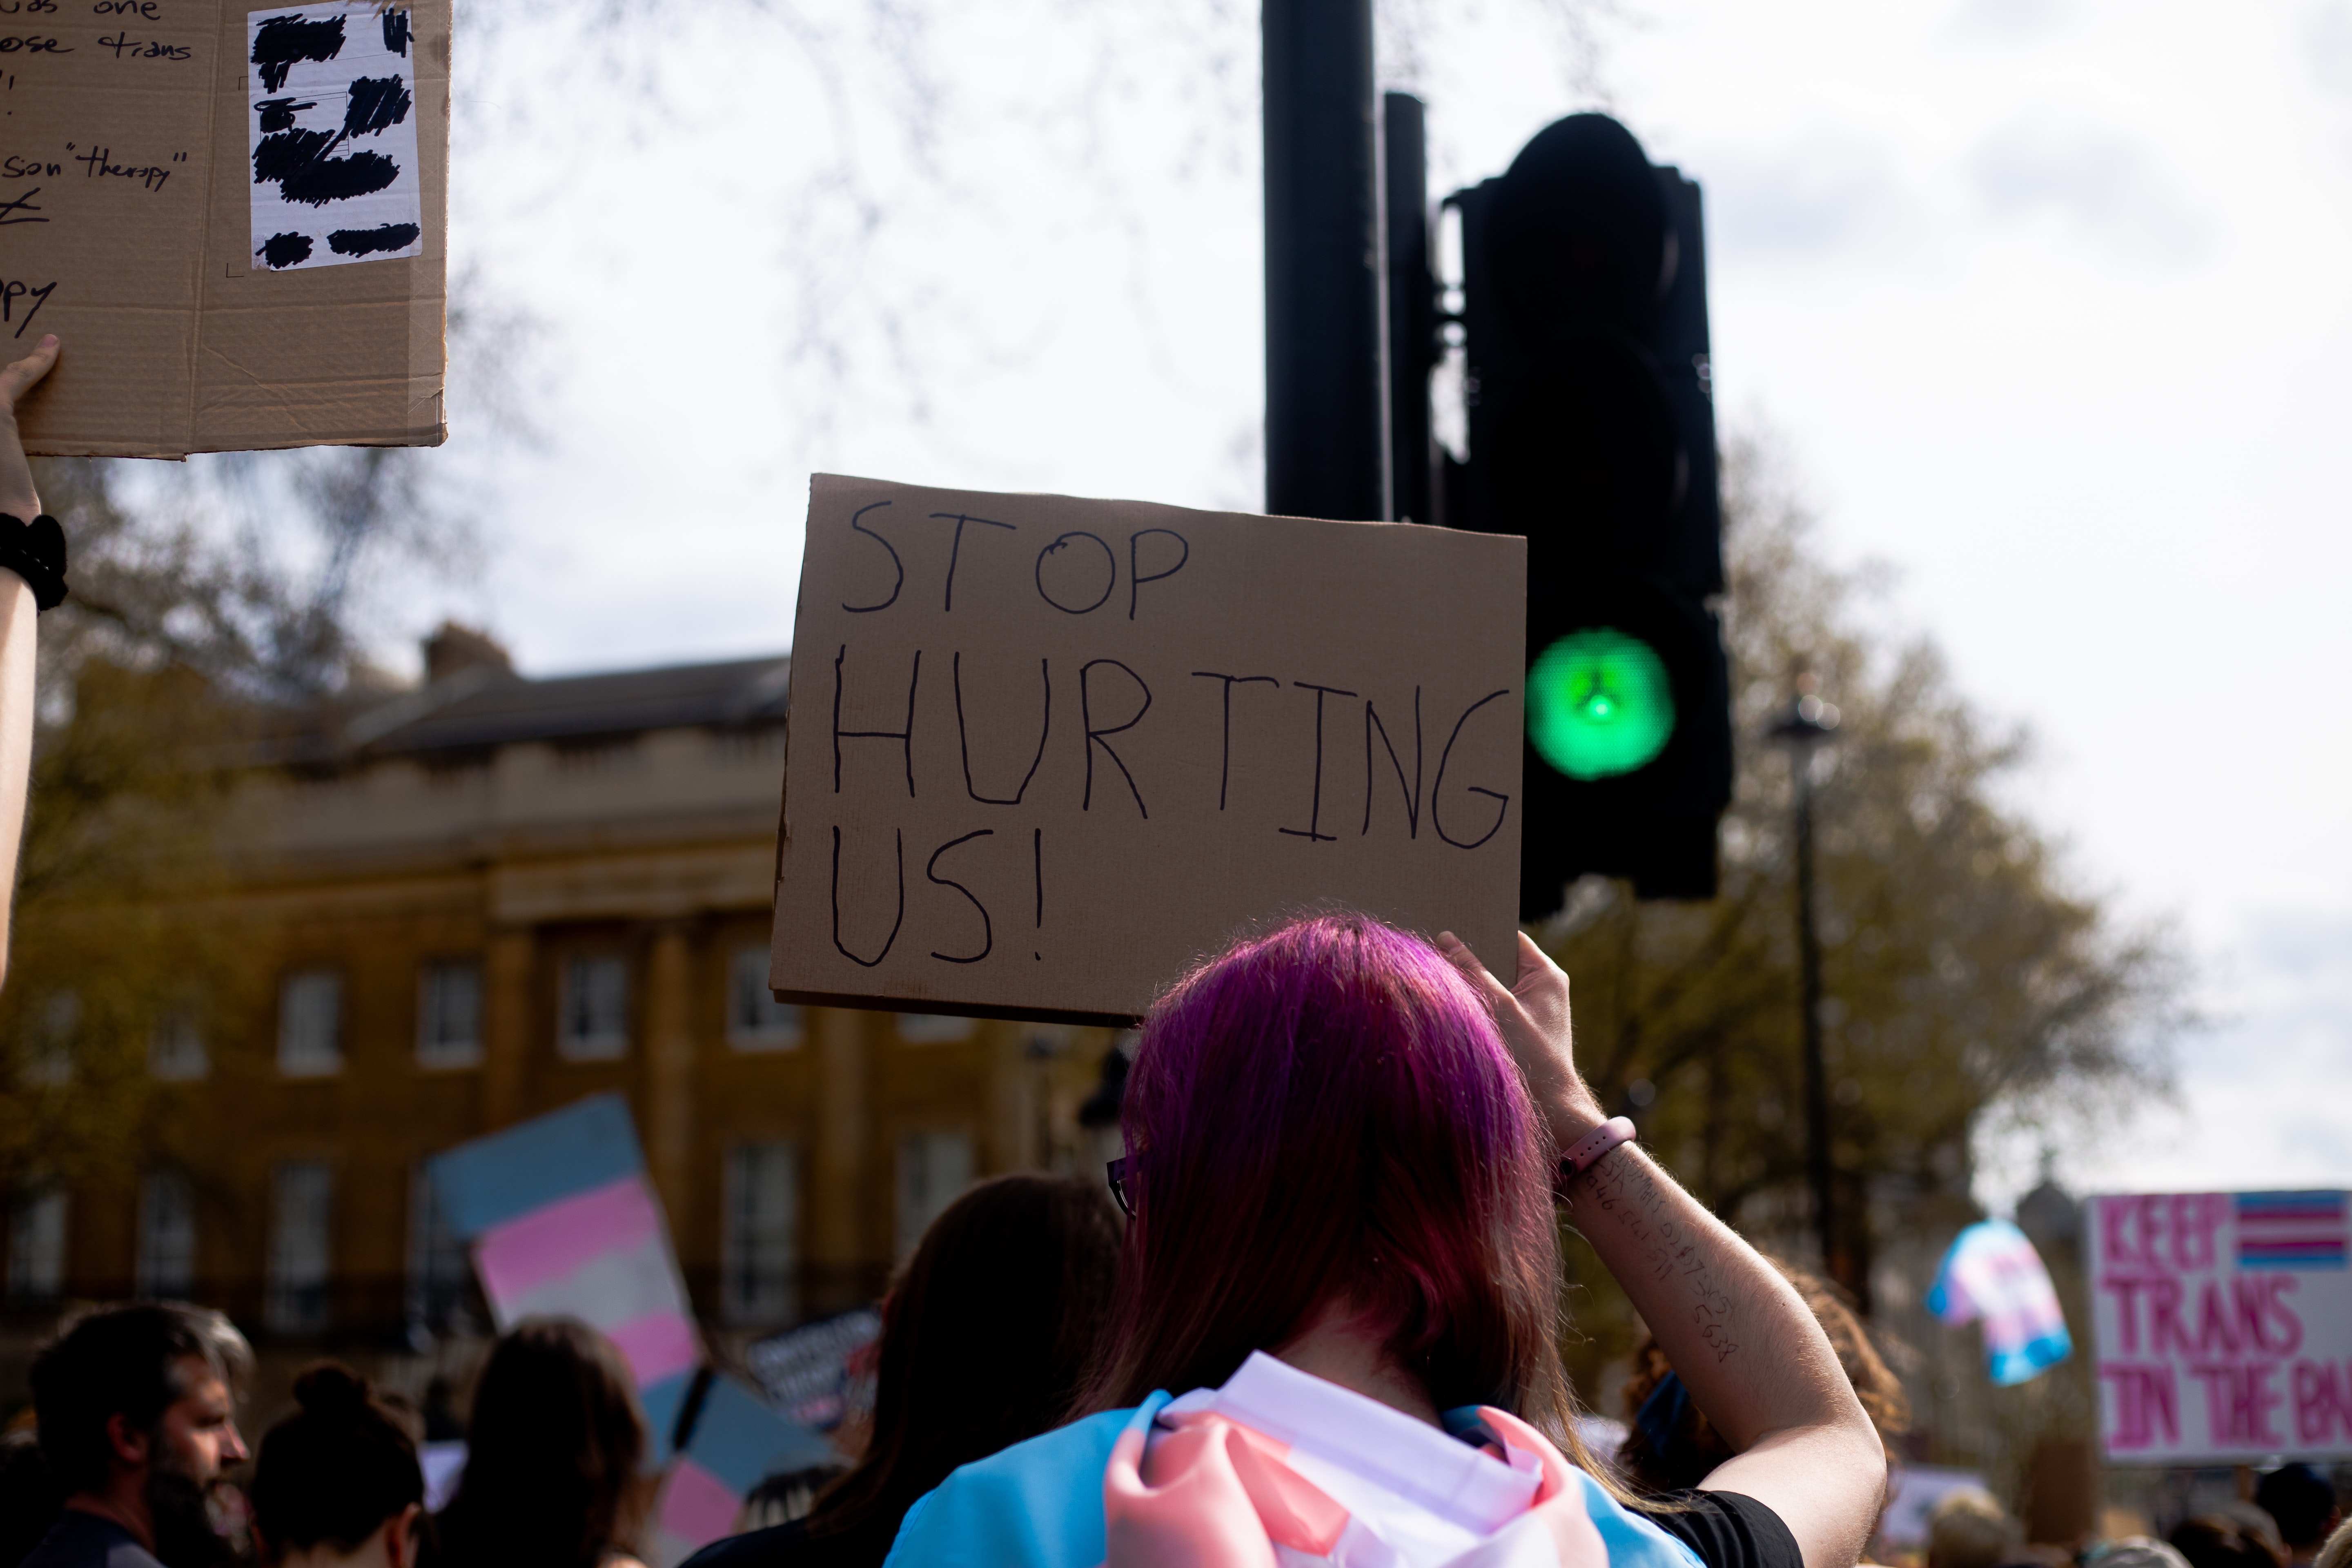 A placard from trans protest against conversion therapy, reading "Stop Hurting Us!"